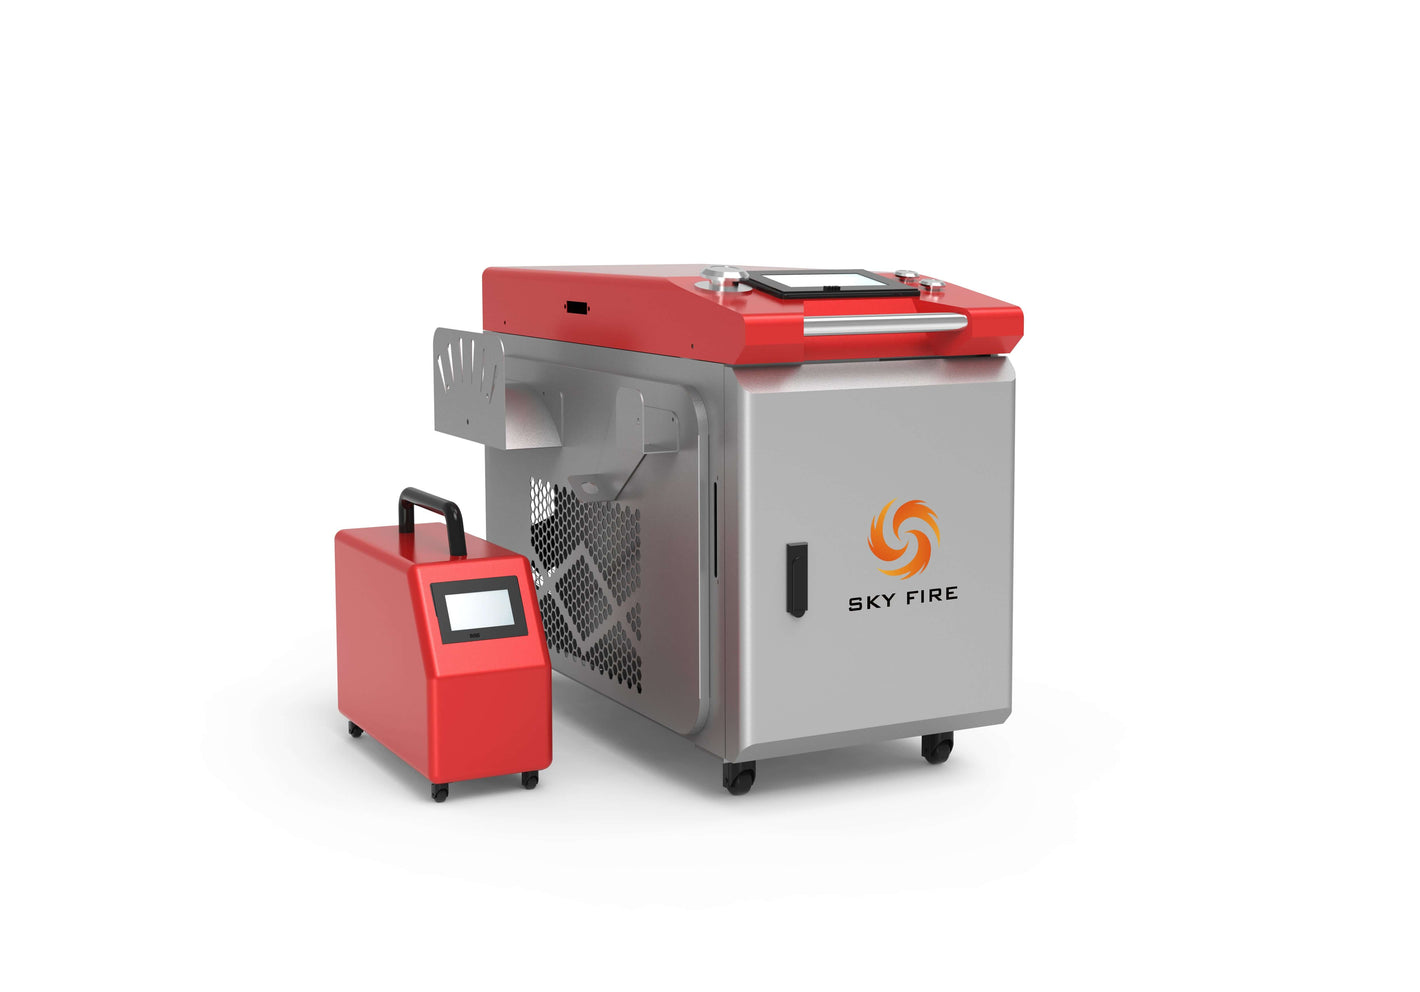 Laser Welding Machine Laser welders: 4x faster than TIG, offering quick, precise joins with minimal heat, ideal for automotive, electronics, and medical industries.